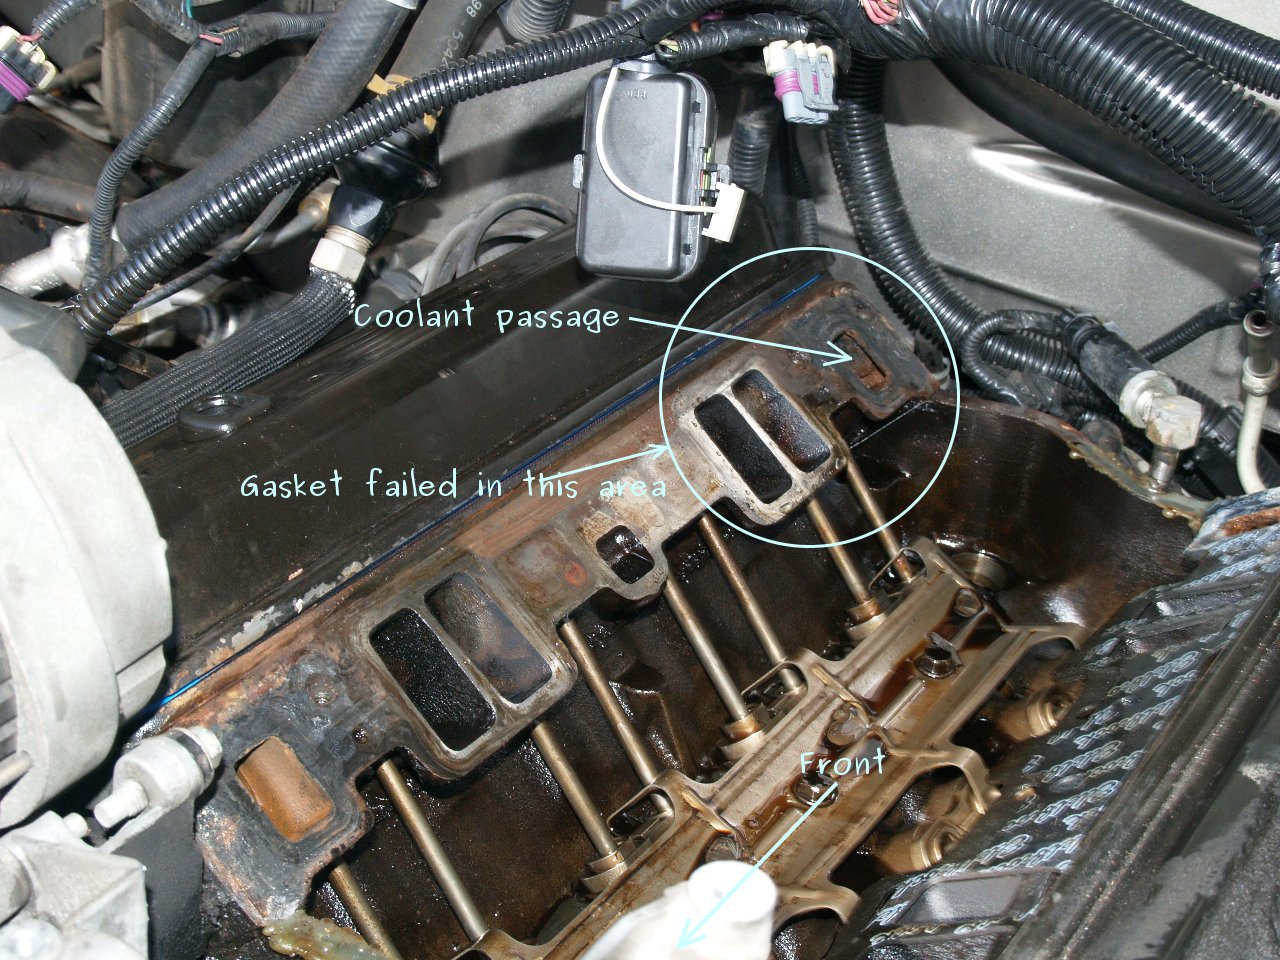 See P0220 in engine